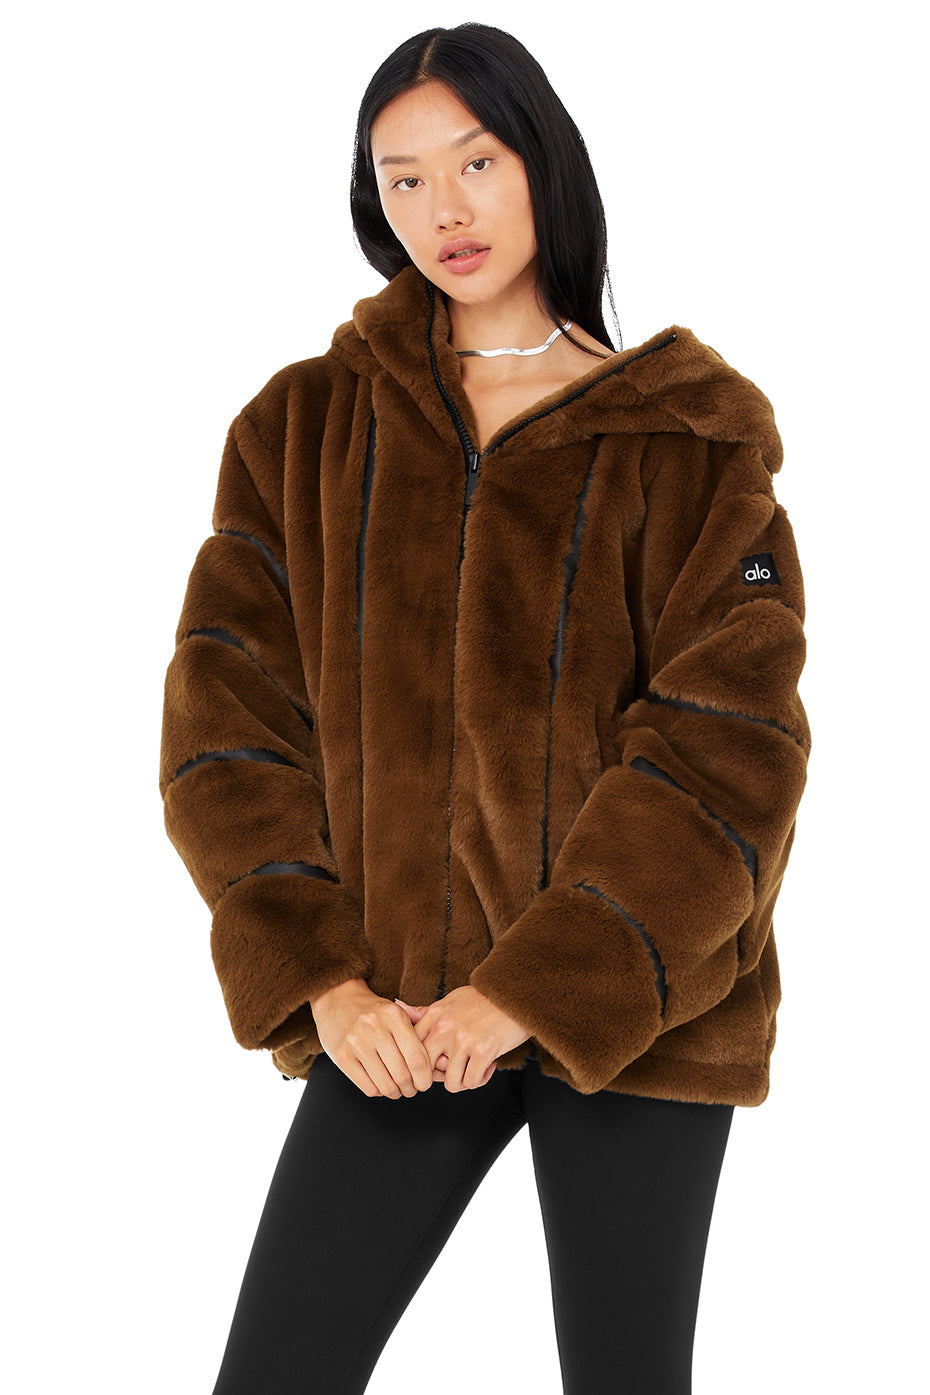 Knock Out Faux Fur Jacket in Chocolate by Alo Yoga - International